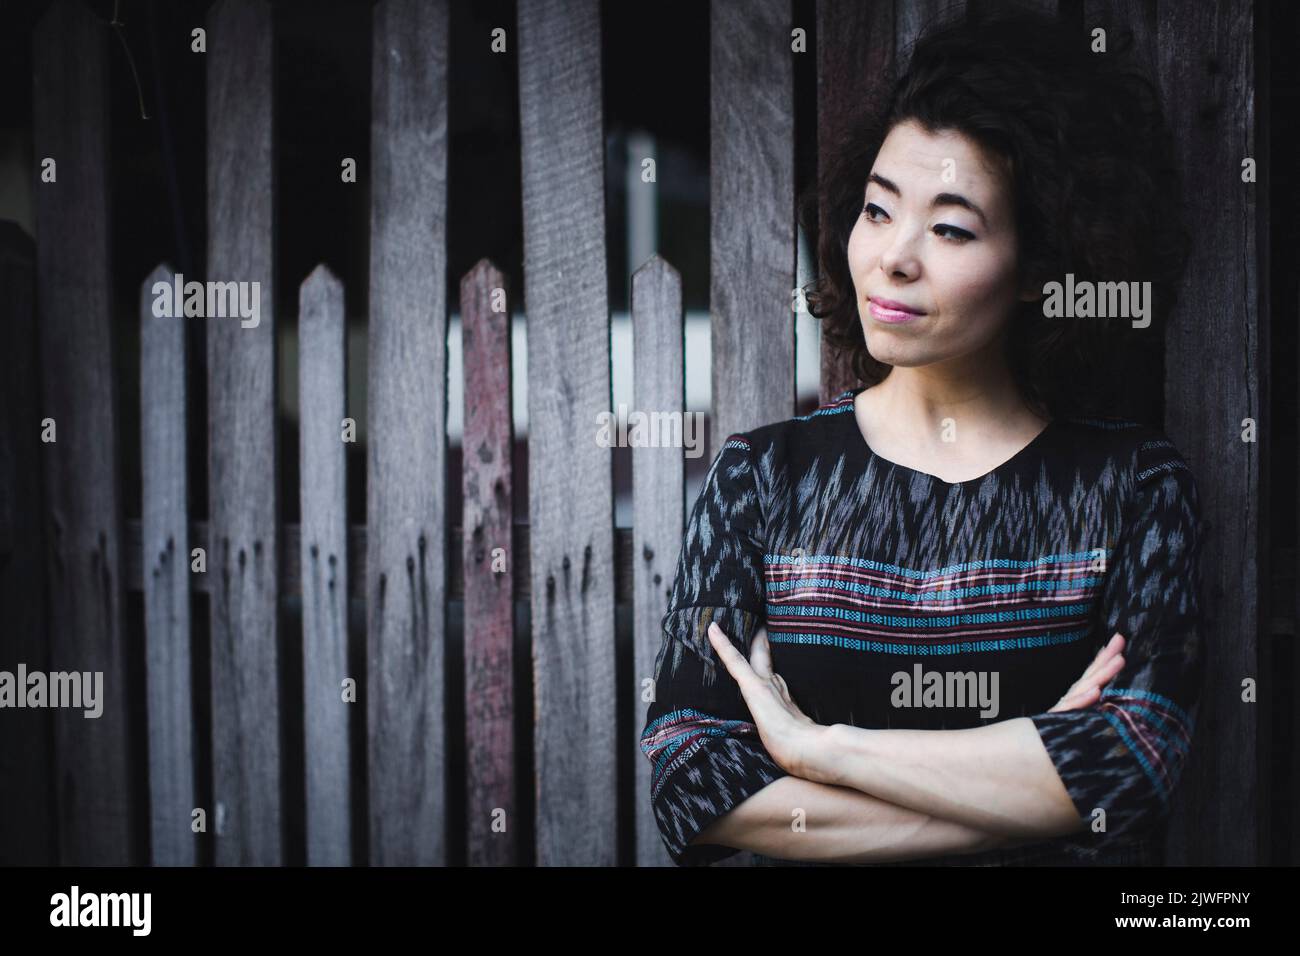 Portrait of an Asian woman near a wooden fence. Stock Photo